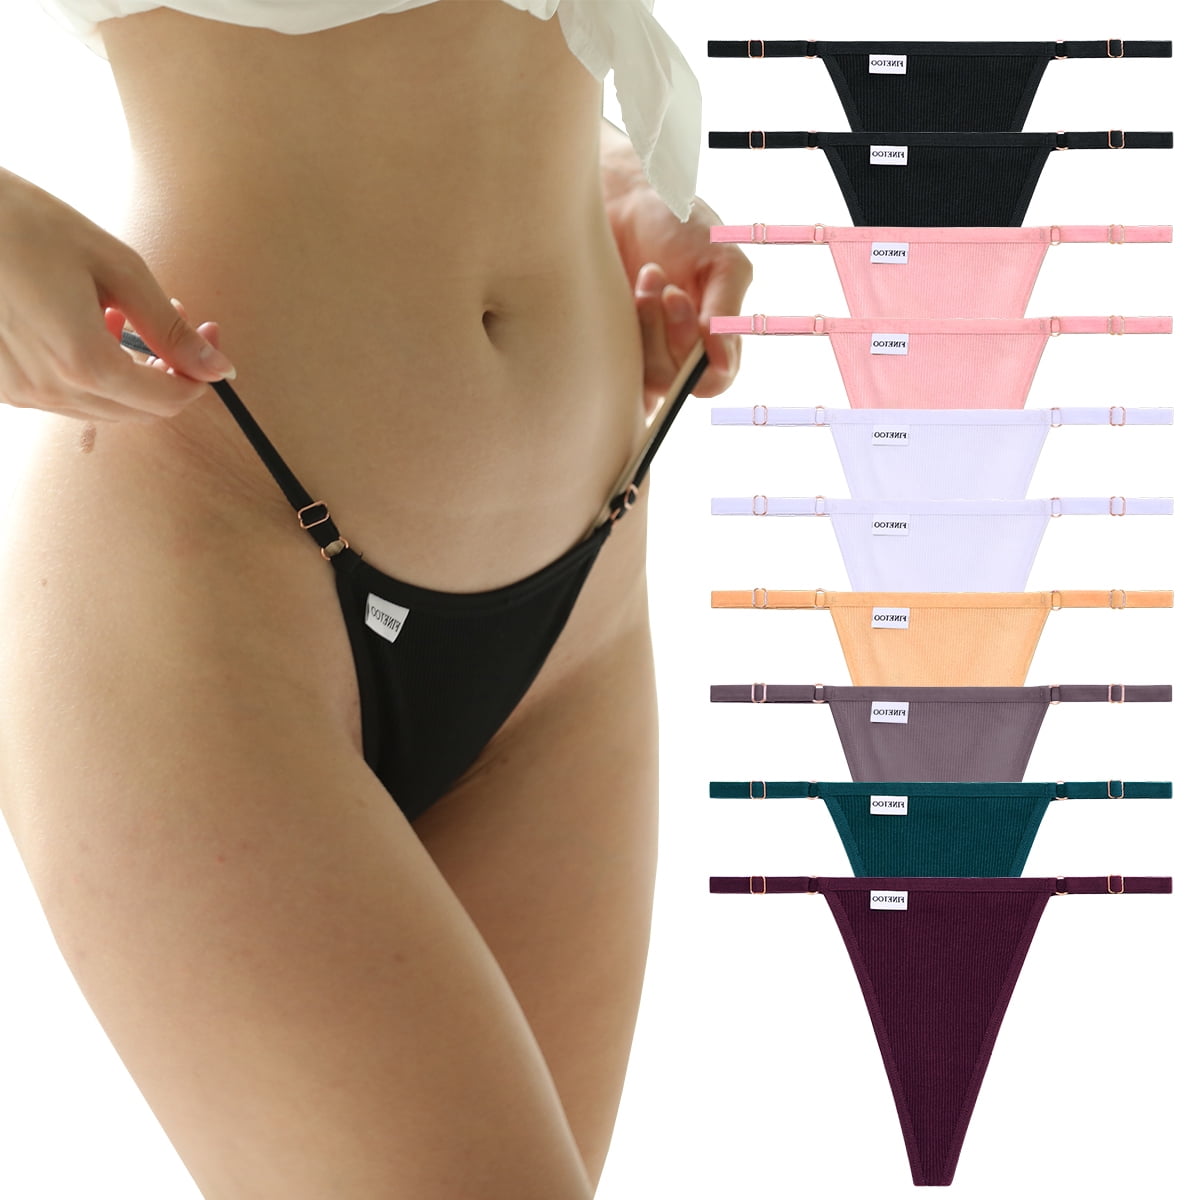 Buy G-String Thongs for Women Cotton Small Size Panties Stretch T-Back  Tangas Low Rise Hipster Underwear - Grey at